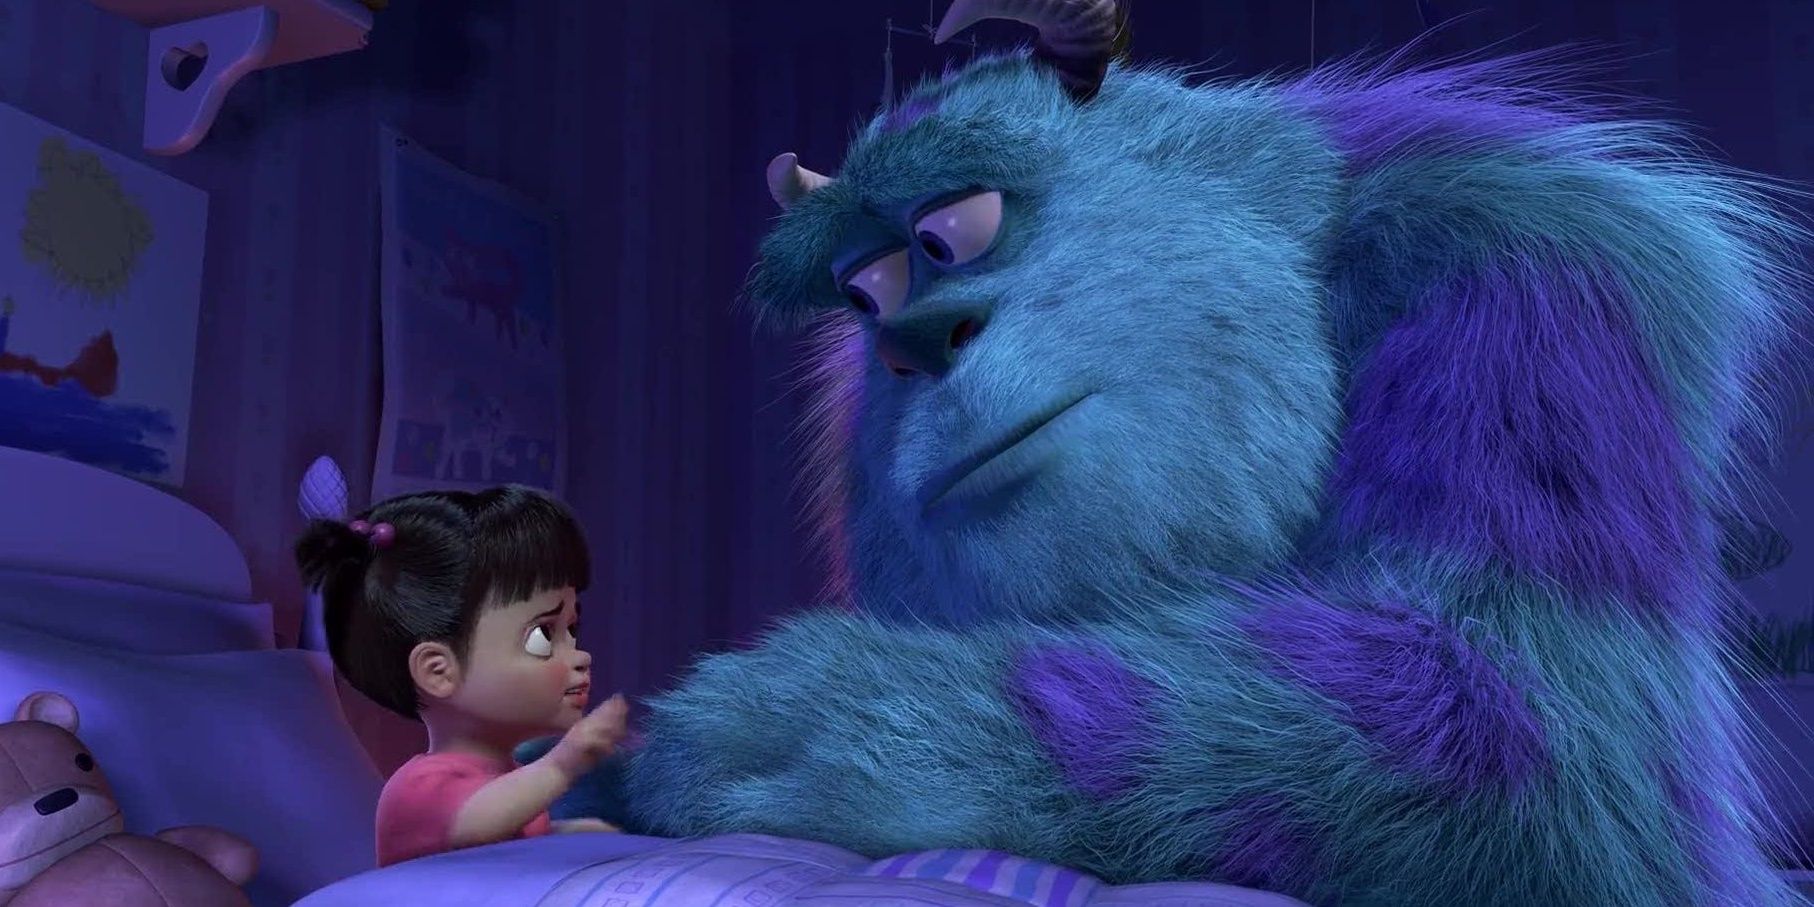 Boo and Sully from Pixar's Monsters, Inc.